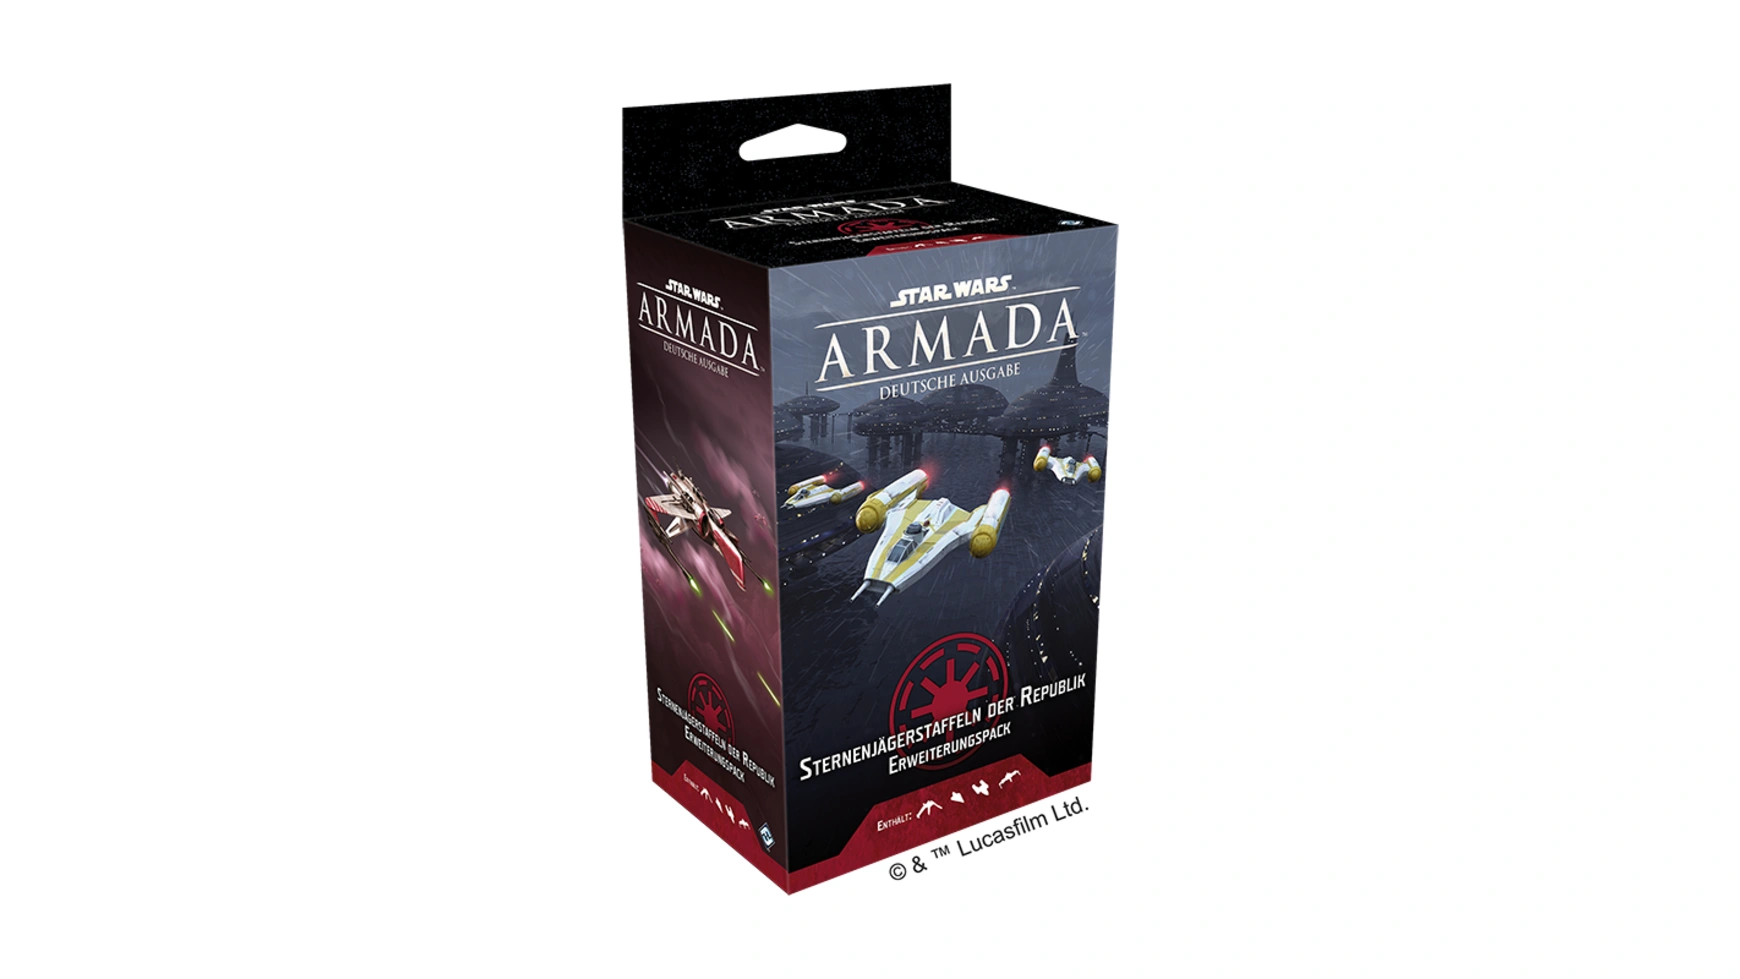 Fantasy Flight Games Star Wars: Armada Starfighter Squadrons of the Republic Expansion DE 1808pcs star battle at ot walker republic dropship starfighter space wars 05053 model building blocks toy compatible with brick